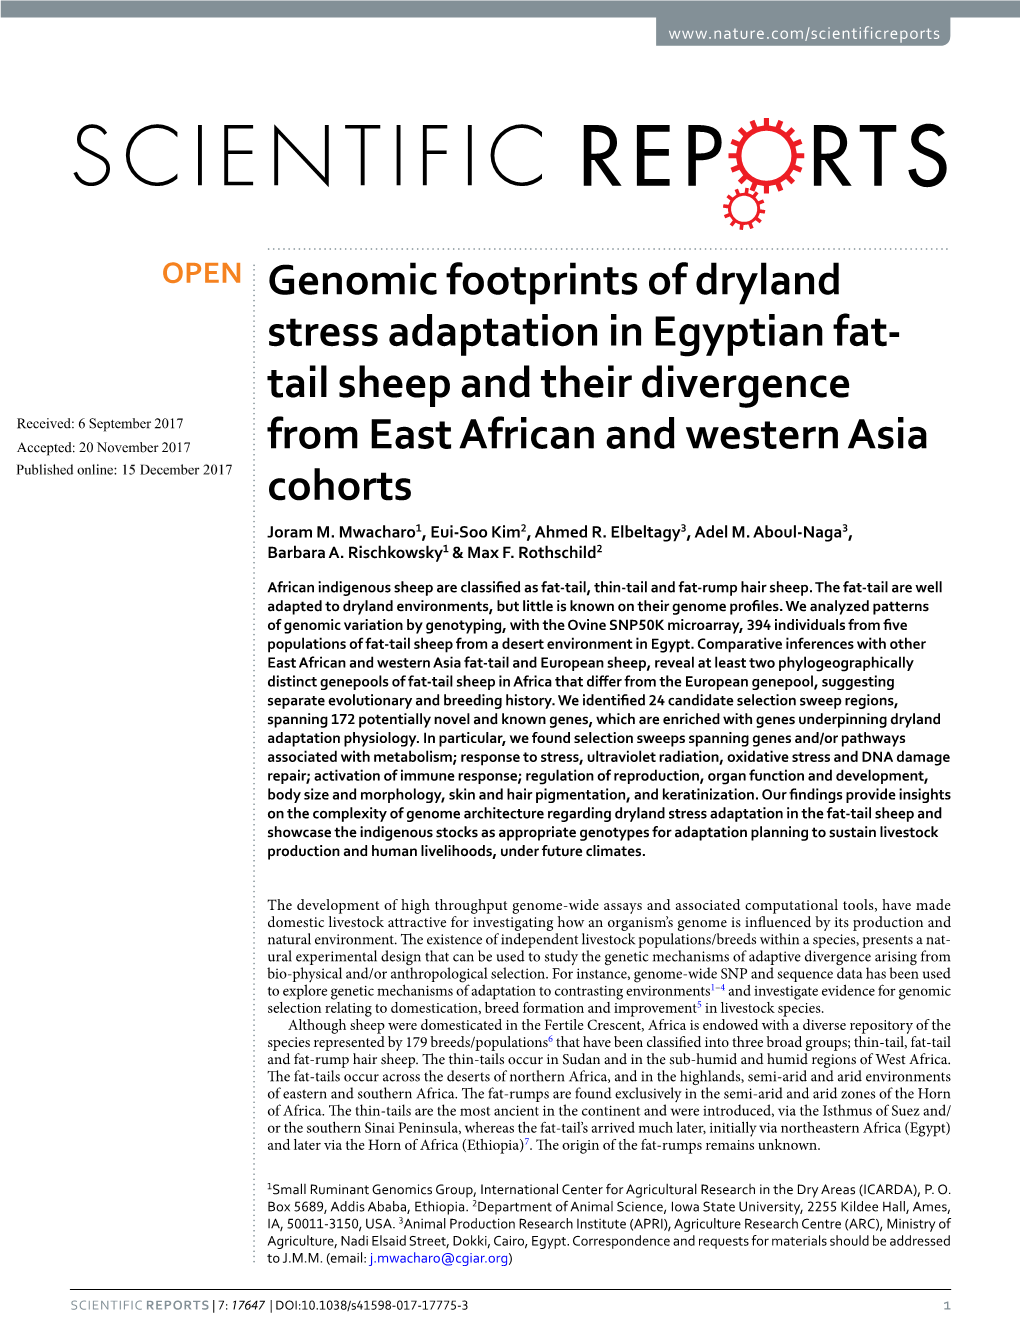 Genomic Footprints of Dryland Stress Adaptation in Egyptian Fat-Tail Sheep and Their Divergence from East African and Western As